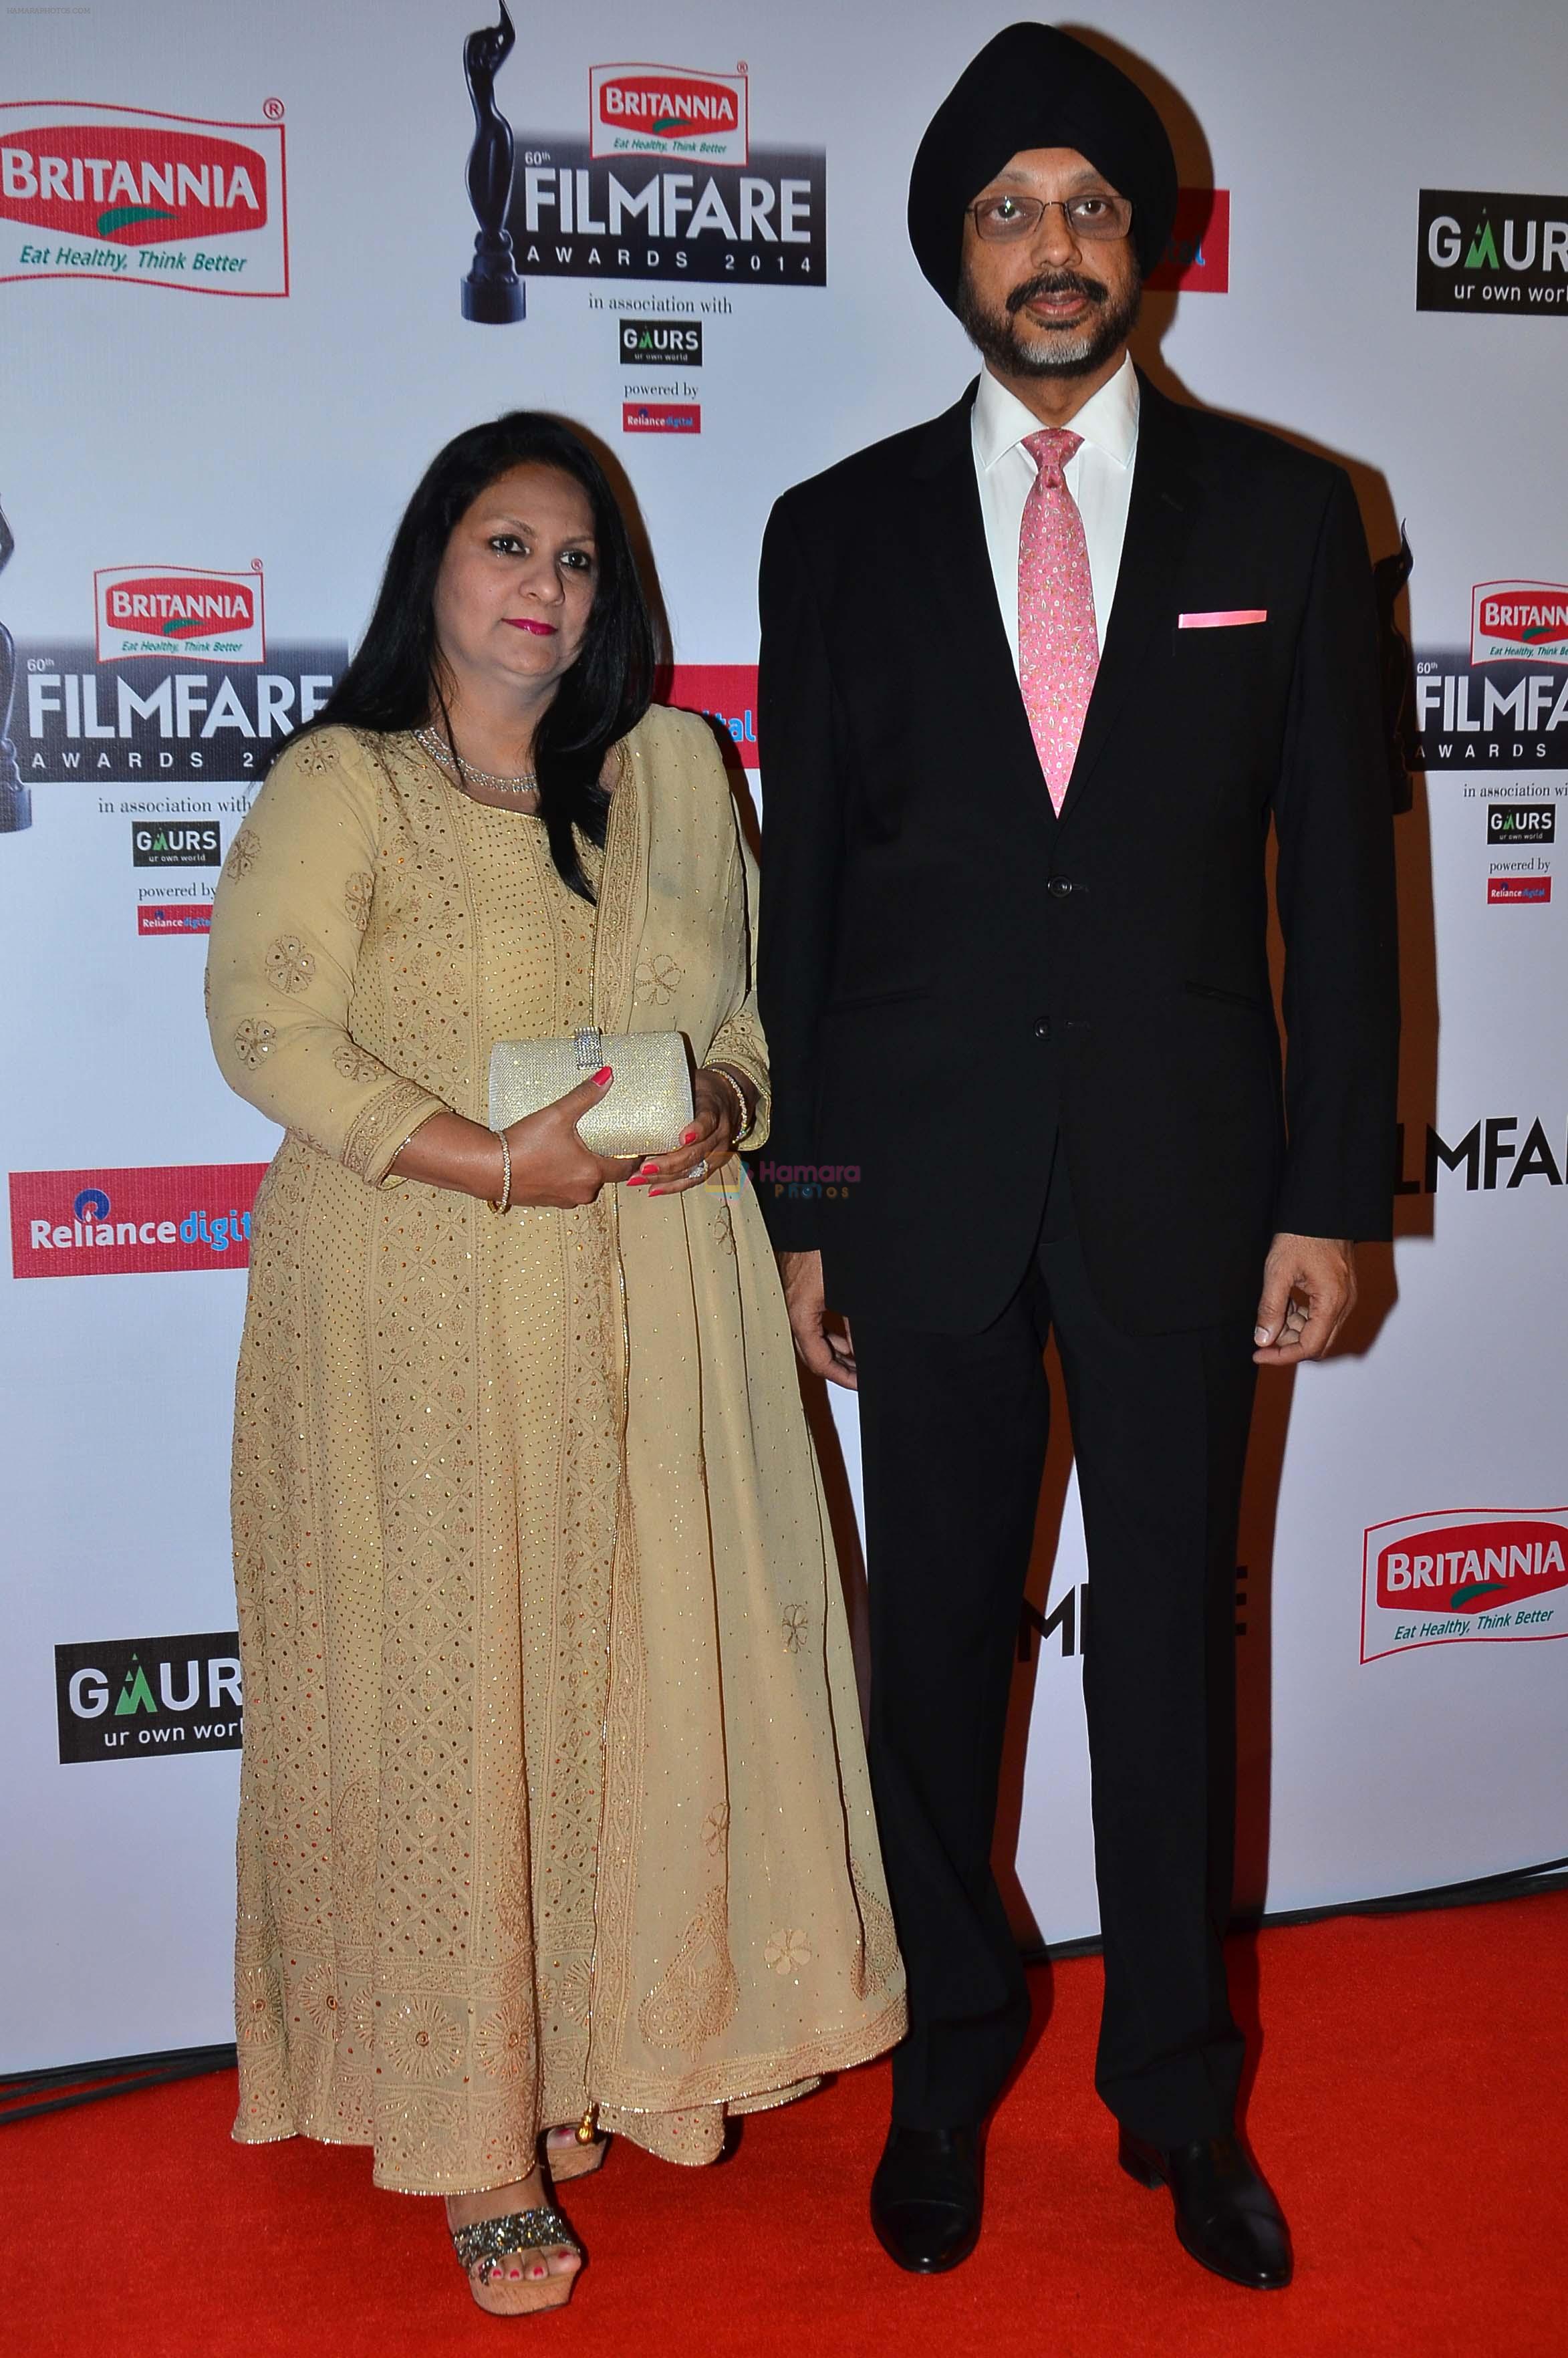 NP Singh with wife graces the red carpet at the 60th Britannia Filmfare Awards